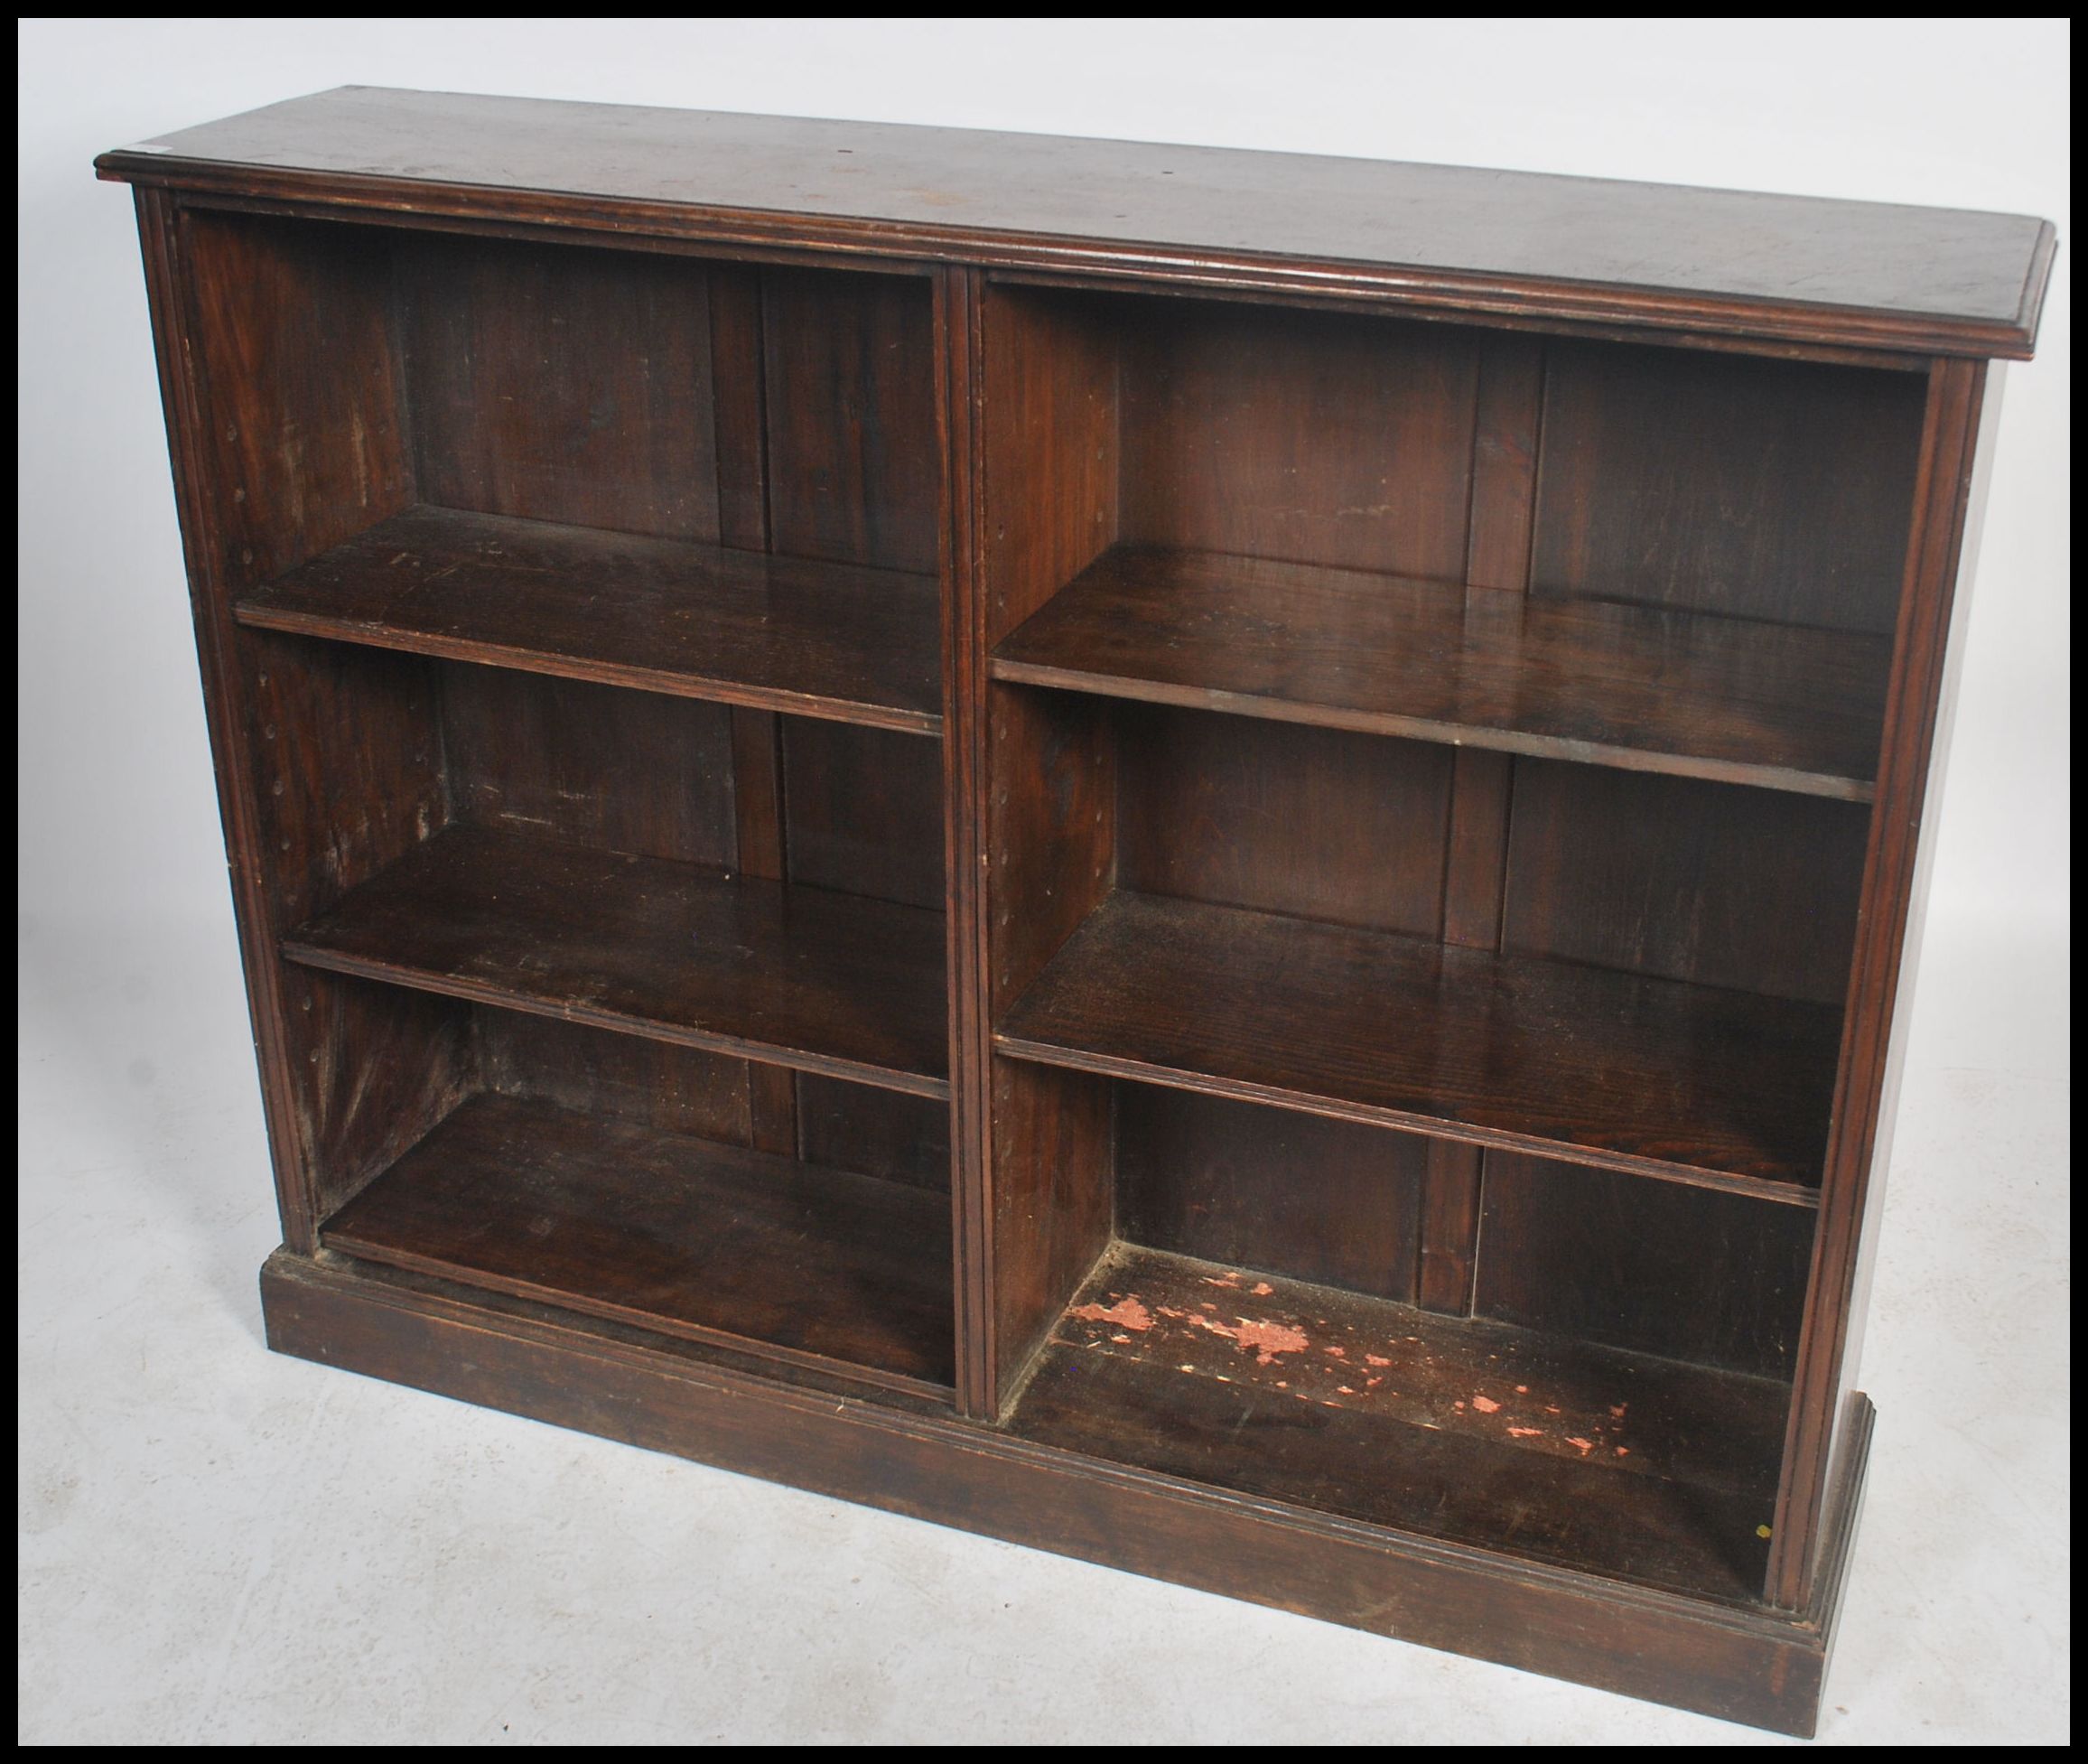 An Edwardian mahogany double open window library lawyers bookcase cabinet having a plinth base - Image 2 of 4